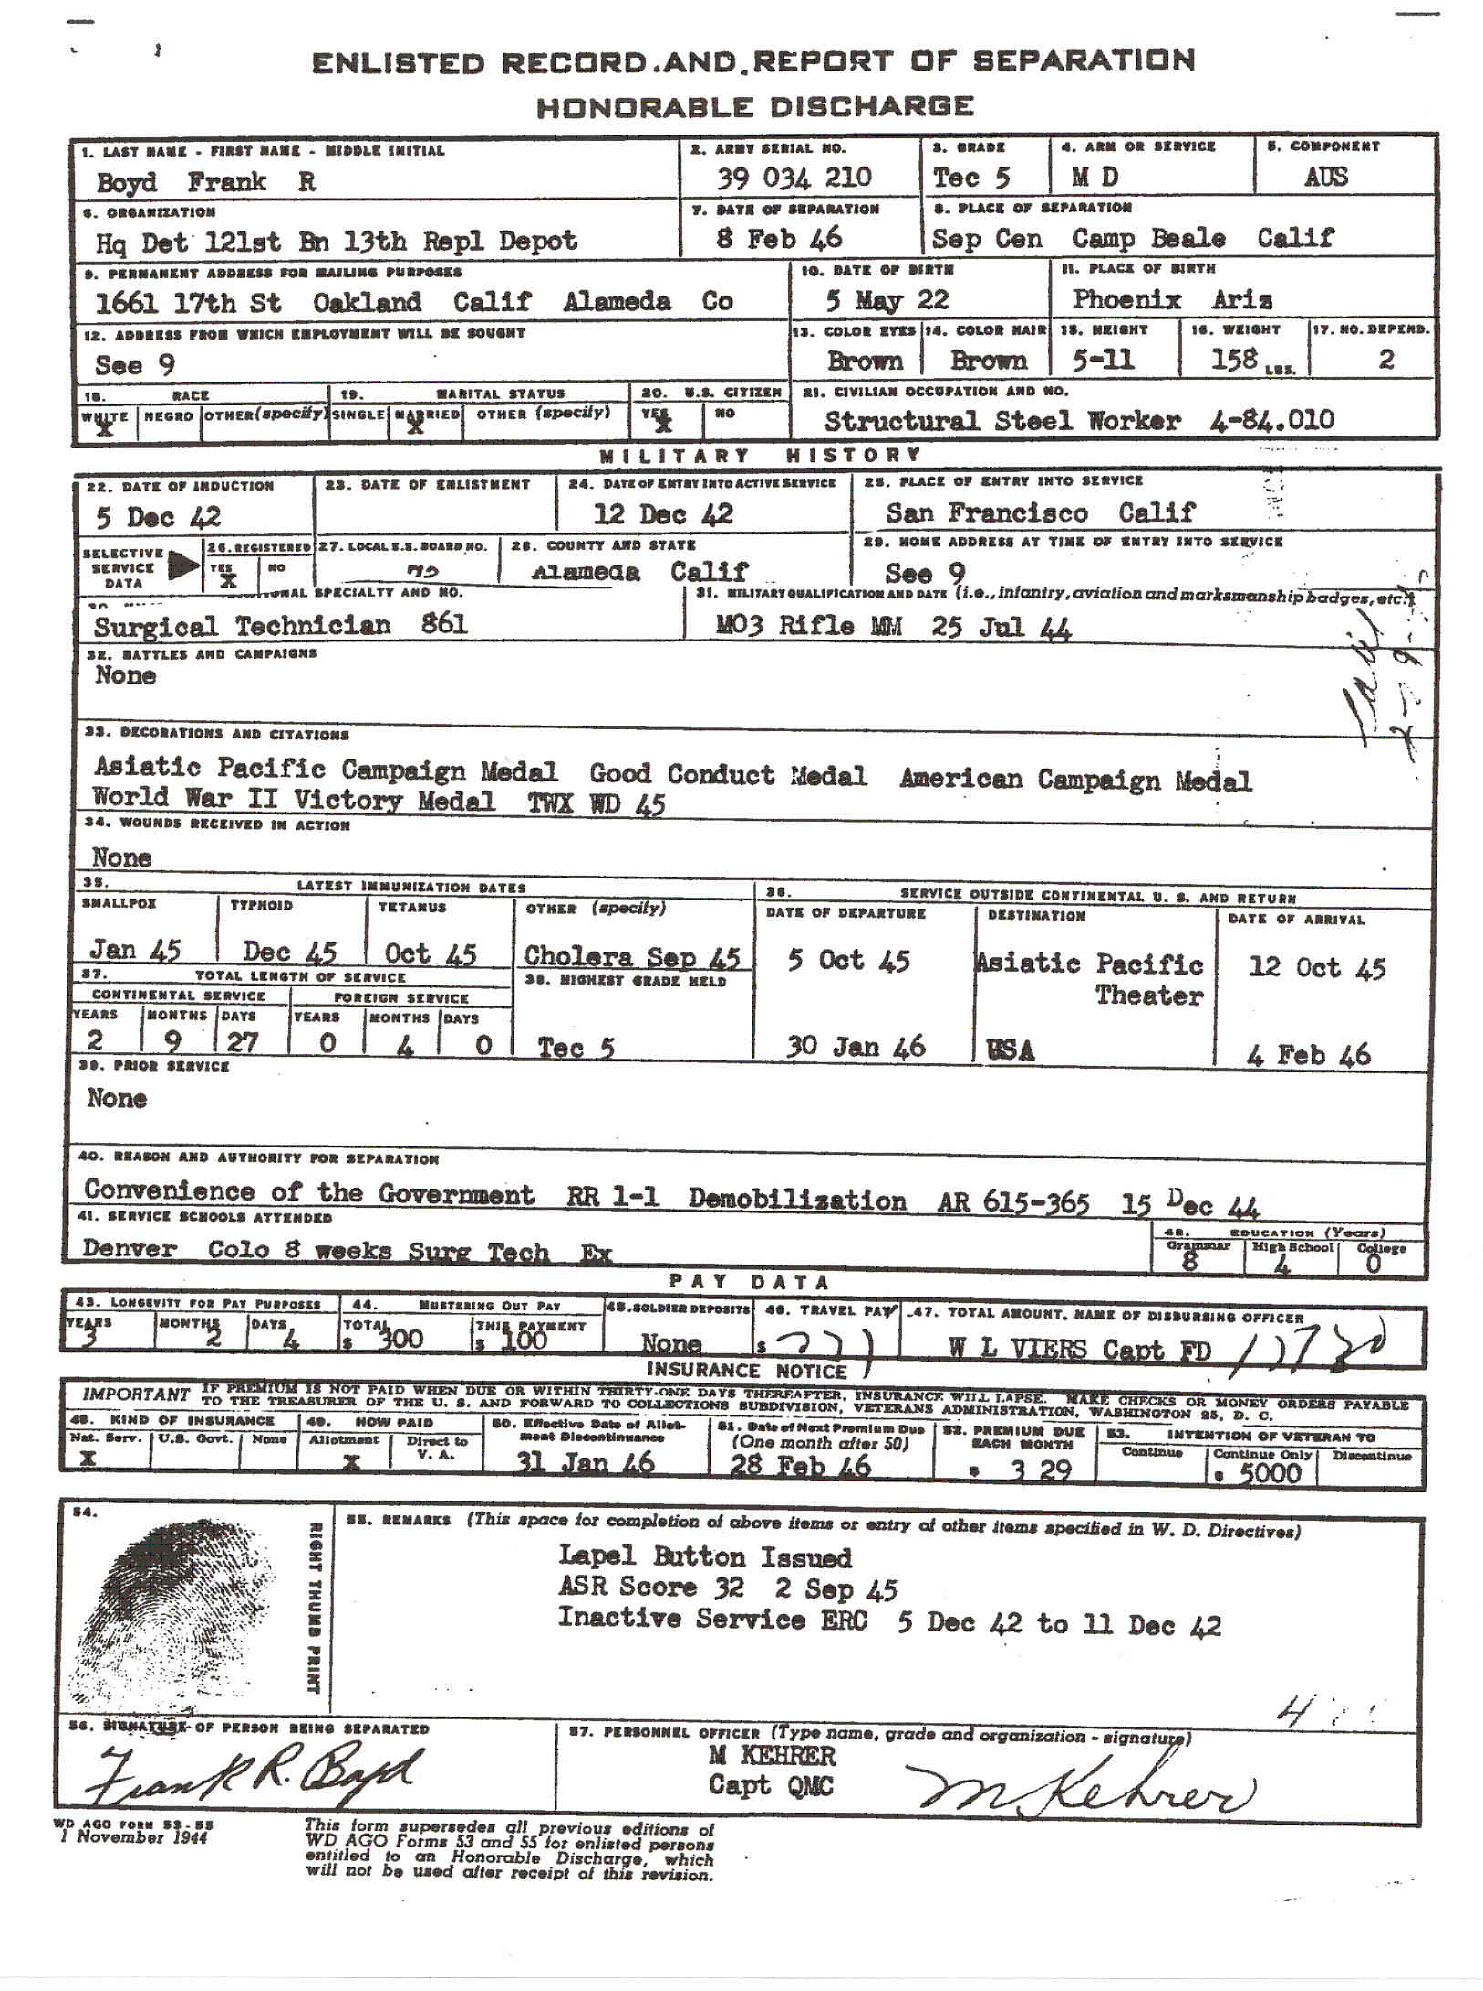 Enlisted record and report of separation of Frank R. Boyd